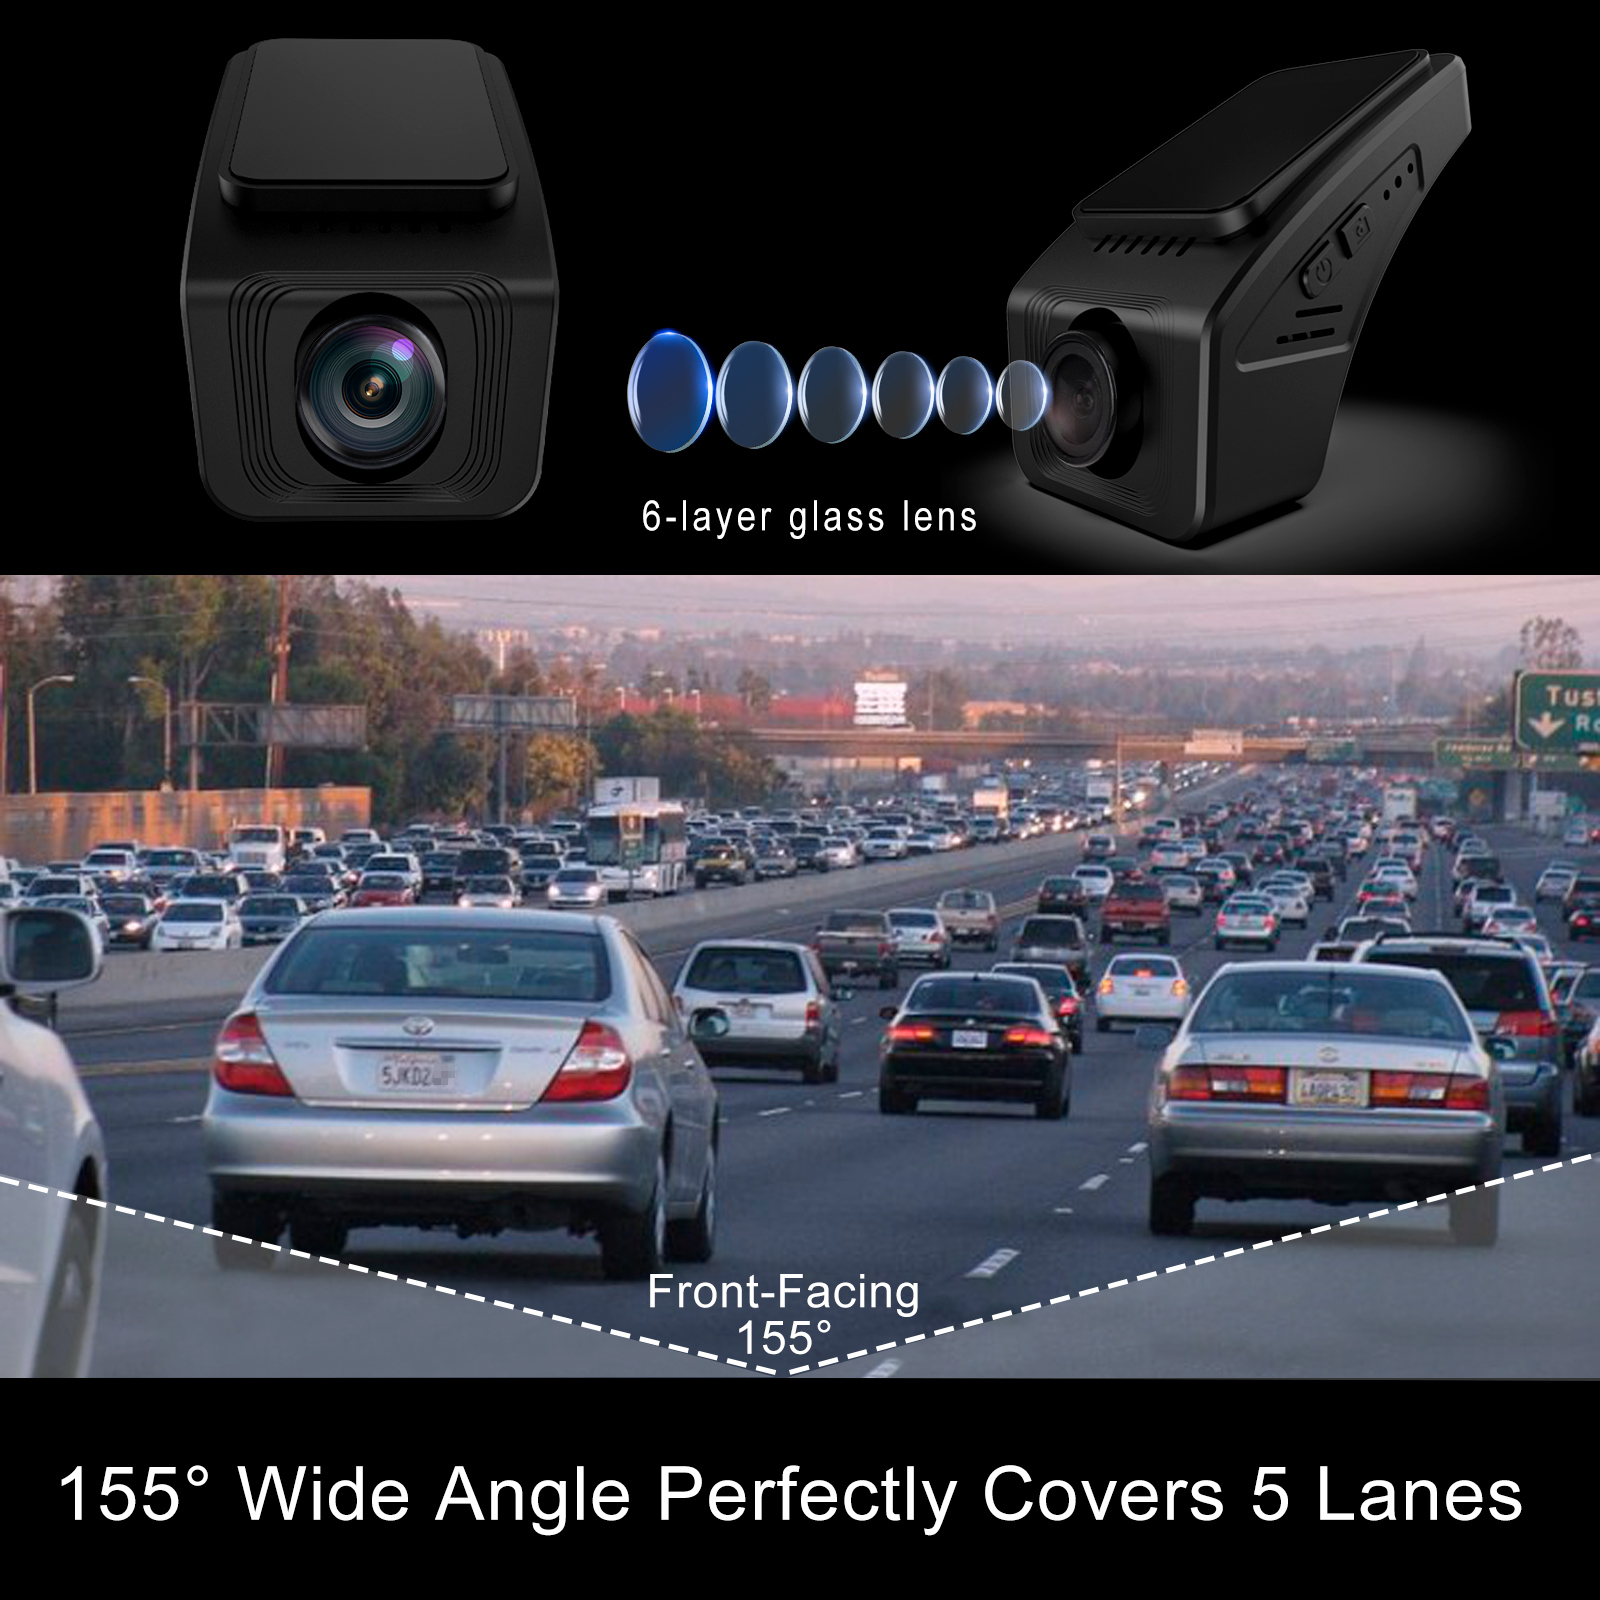 AX2V 2K WiFi Dash Cam for Cars with Super Night Vision and 170° Wide Angle  - Screenless 1600P Dash Camera with WDR, G-Sensor, Loop Recording, and